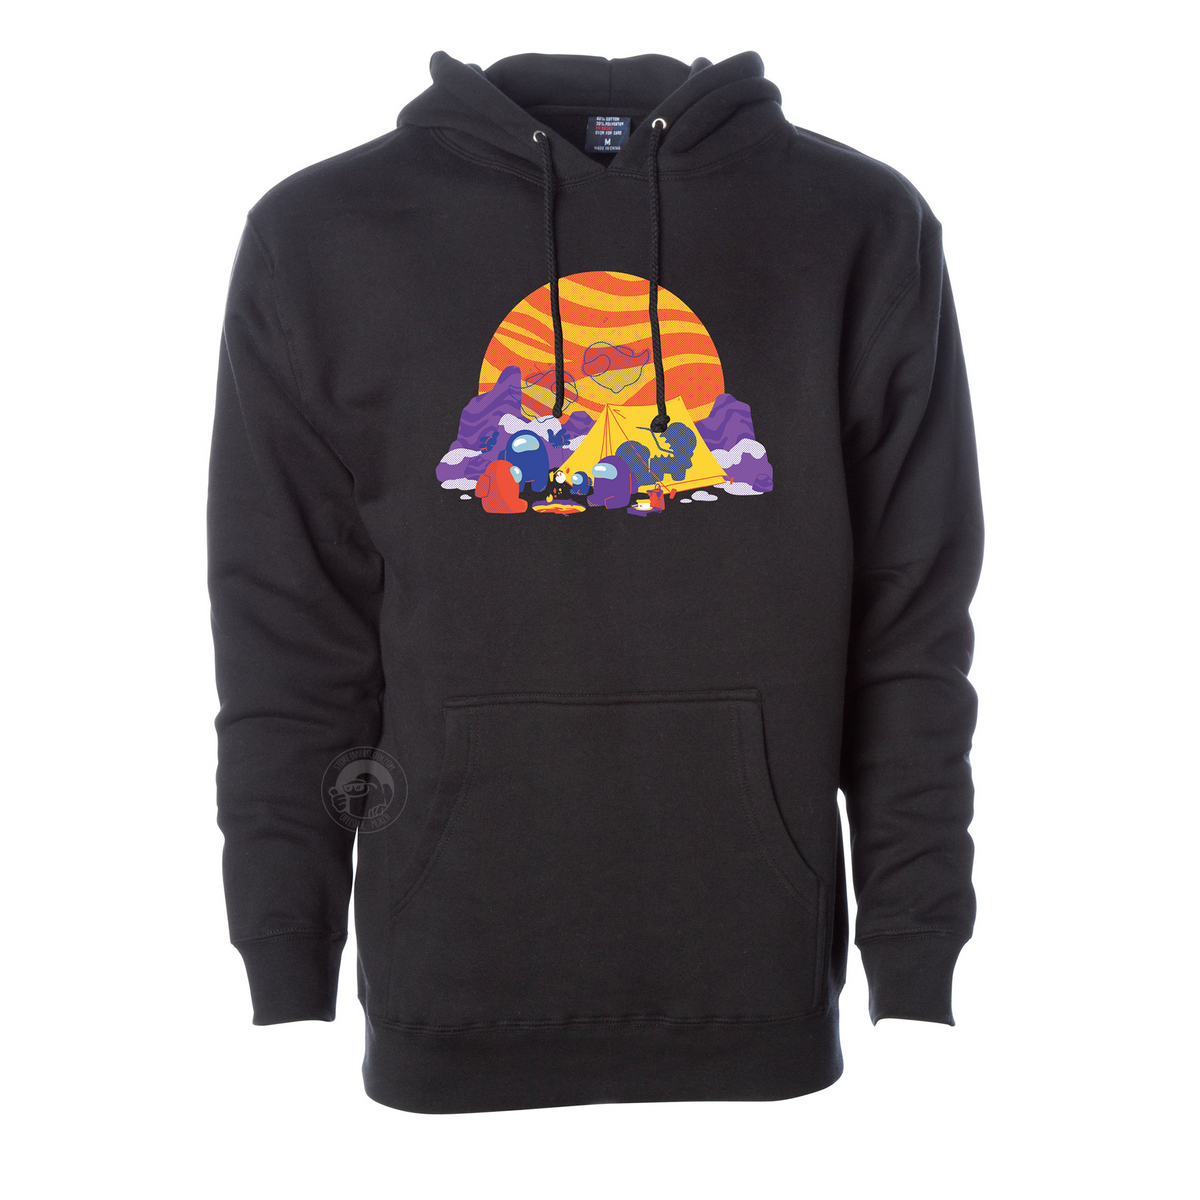 A product photo of the Among Us: Polus Camping Hoodie. The hoodie is black and the printed illustration depicts a purple, blue and red crewmates with a camping tent among the snowy mountains of Polus with a large orange and yellow swirly sun in the background.